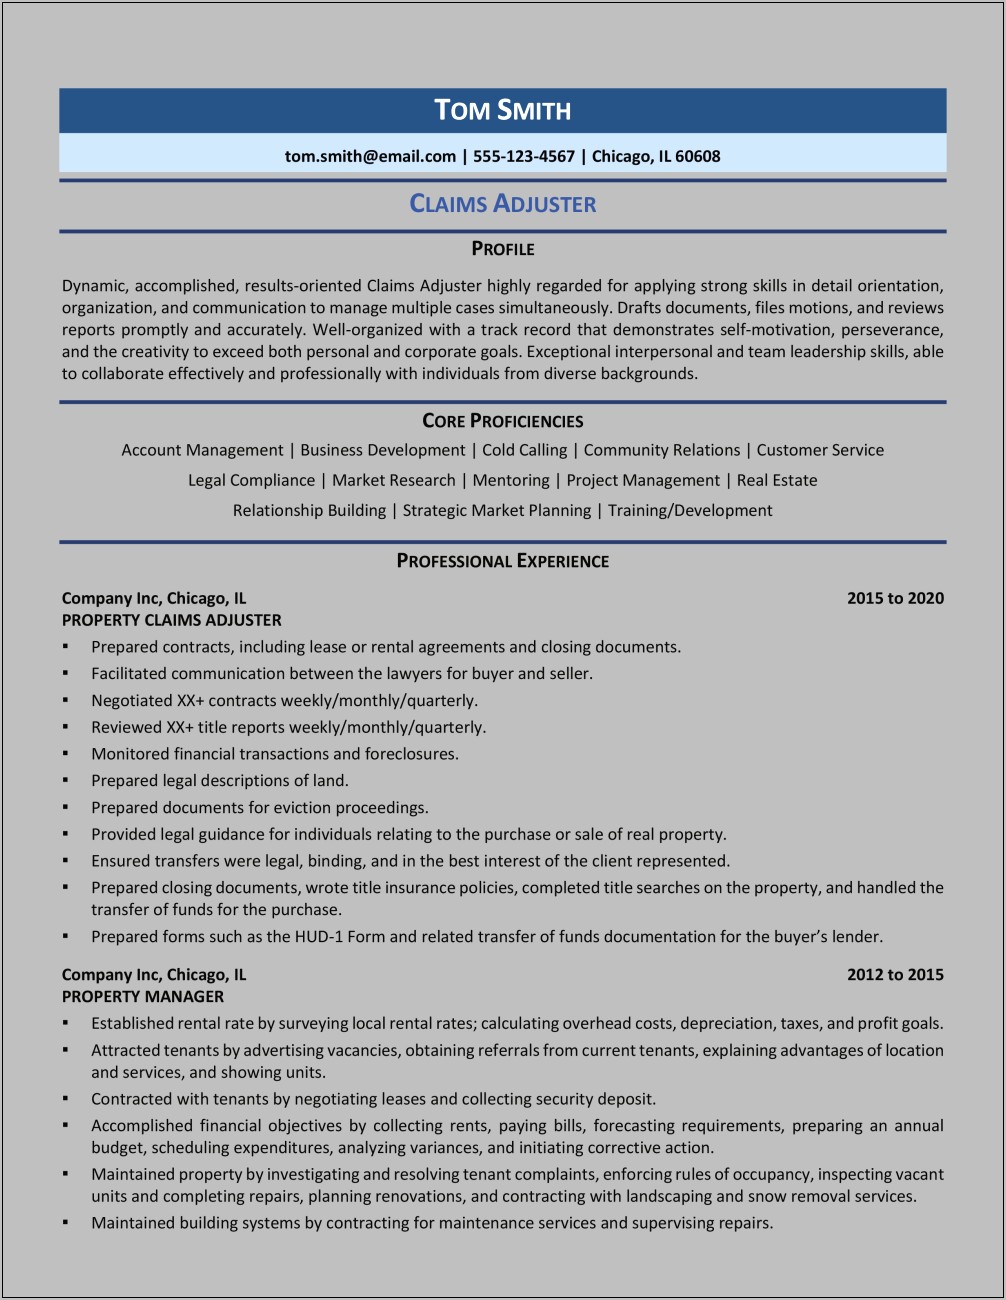 Claims Adjuster Trainee Resume Examples